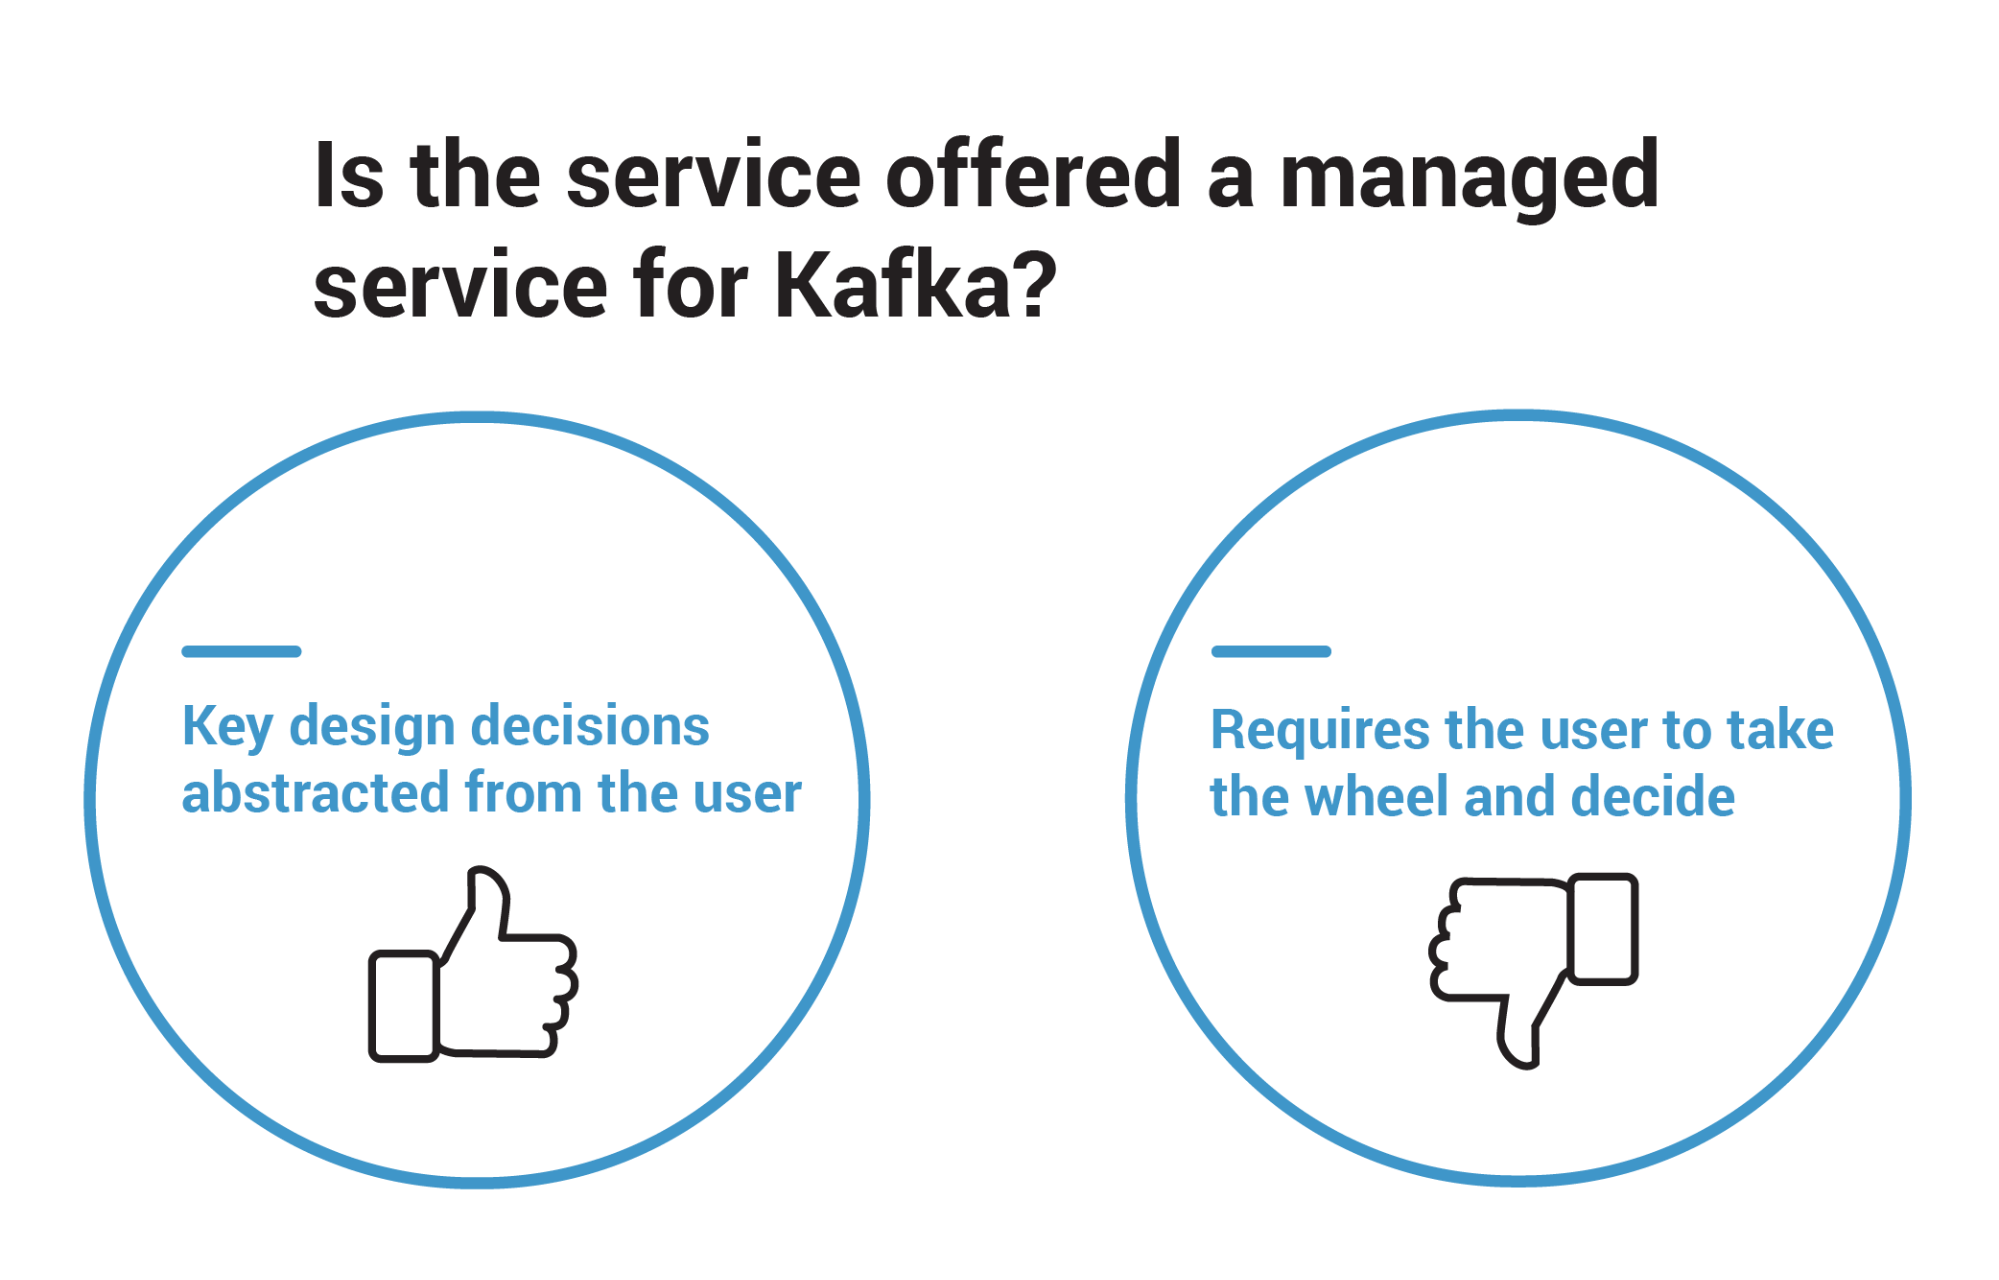 Is the service offered a managed service for Kafka?